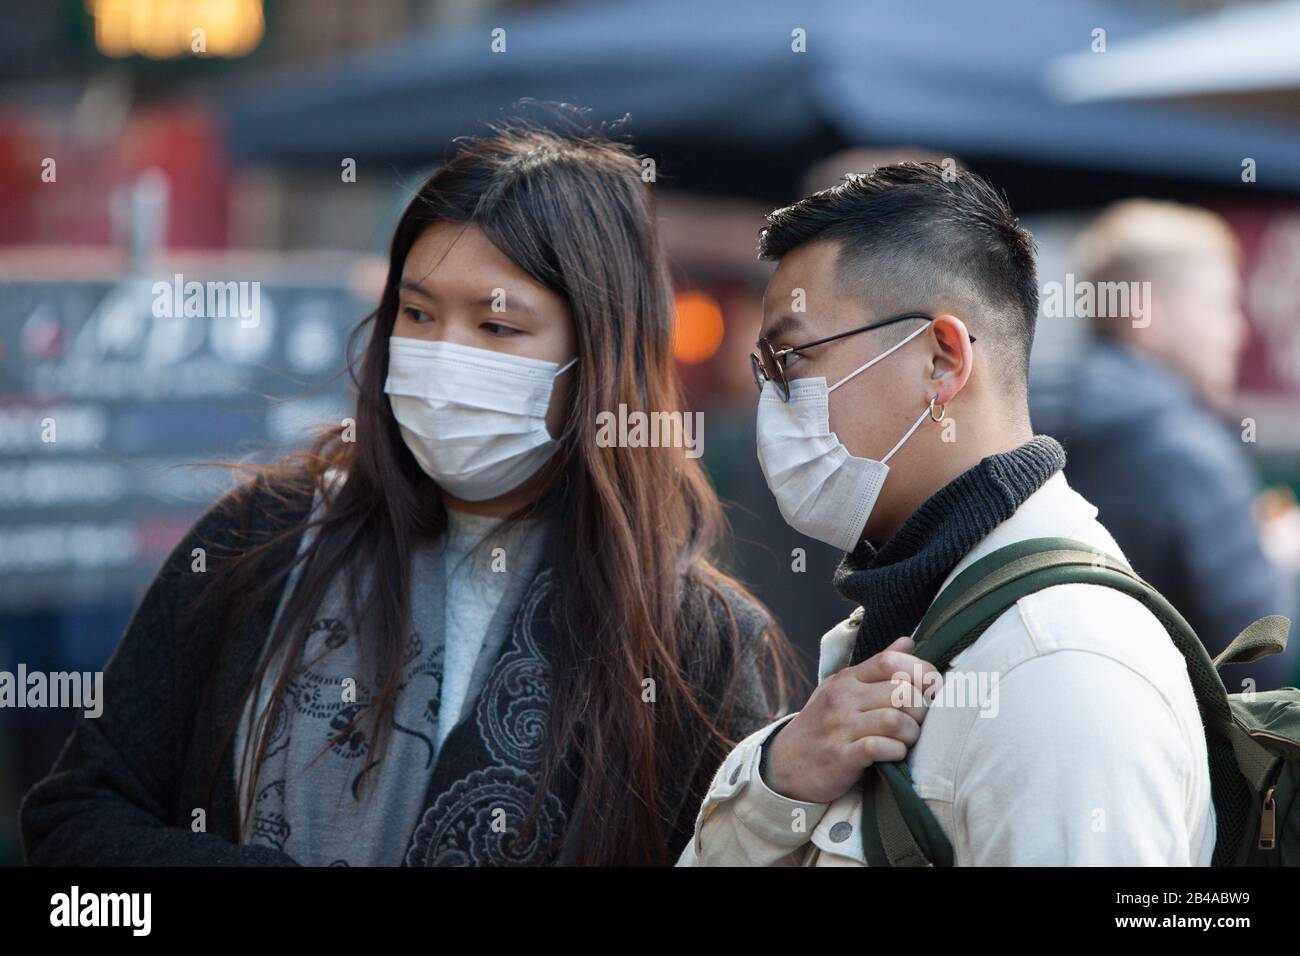 London, UK. 6th March, 2020. Londoners and tourists took advantage of a sunny day to explore the city's sights without wearing facemasks, showing a 'business as usual' attitude to the Corvid-19 coronavirus. Anna Watson/Alamy Live News Stock Photo